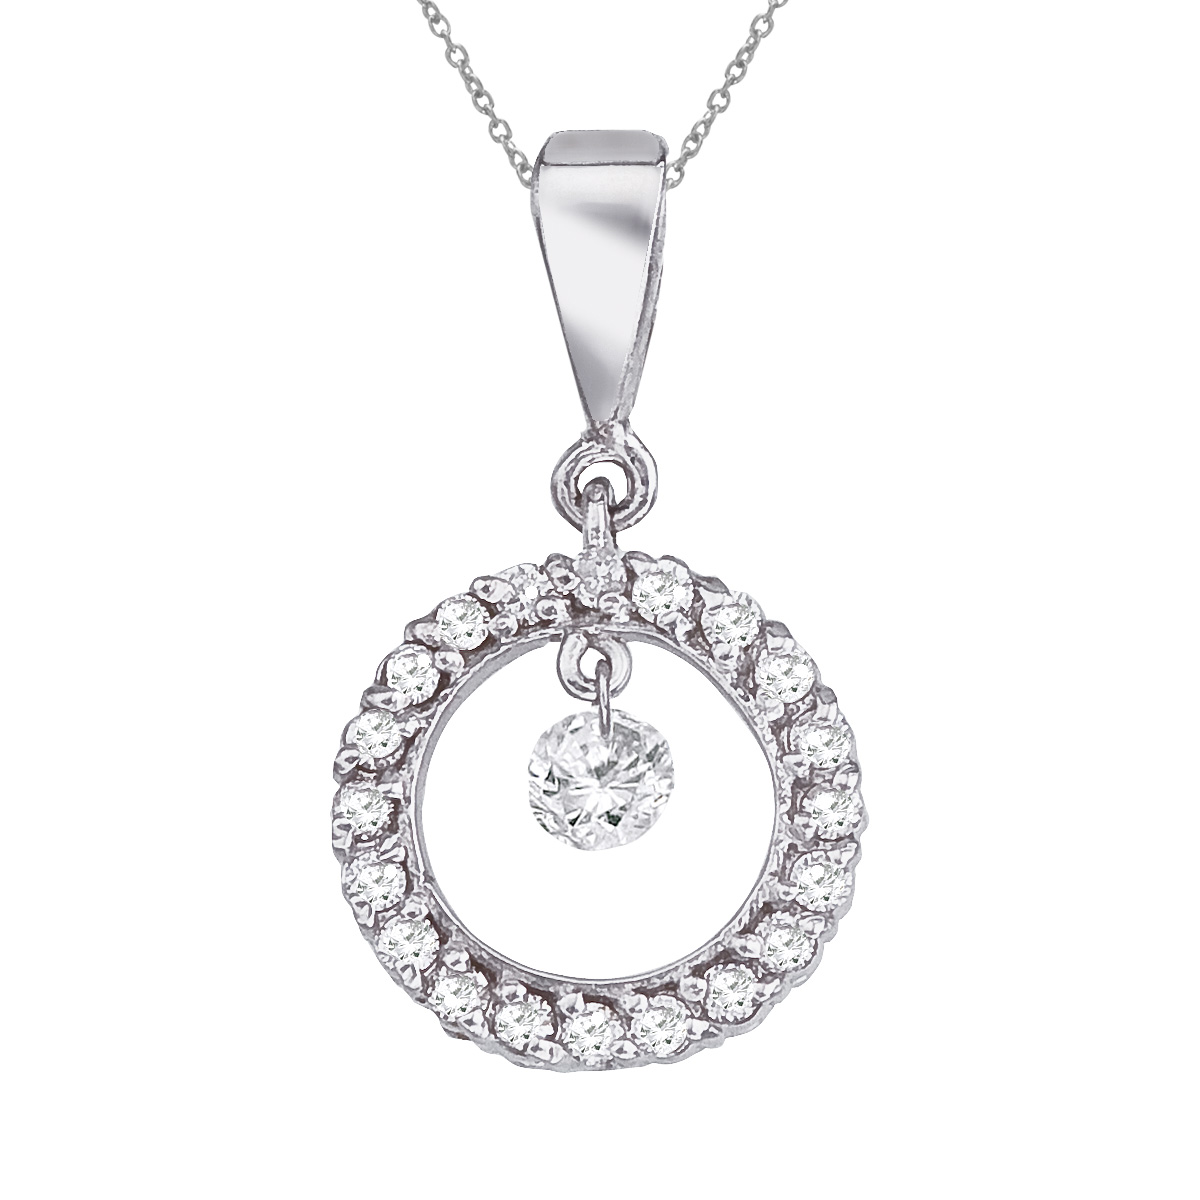 JCX2911: 14k gold Dashinng Diamonds pendant with 0.25 total ct diamonds. The center dangling diamond dances and shimmers with every heartbeat.